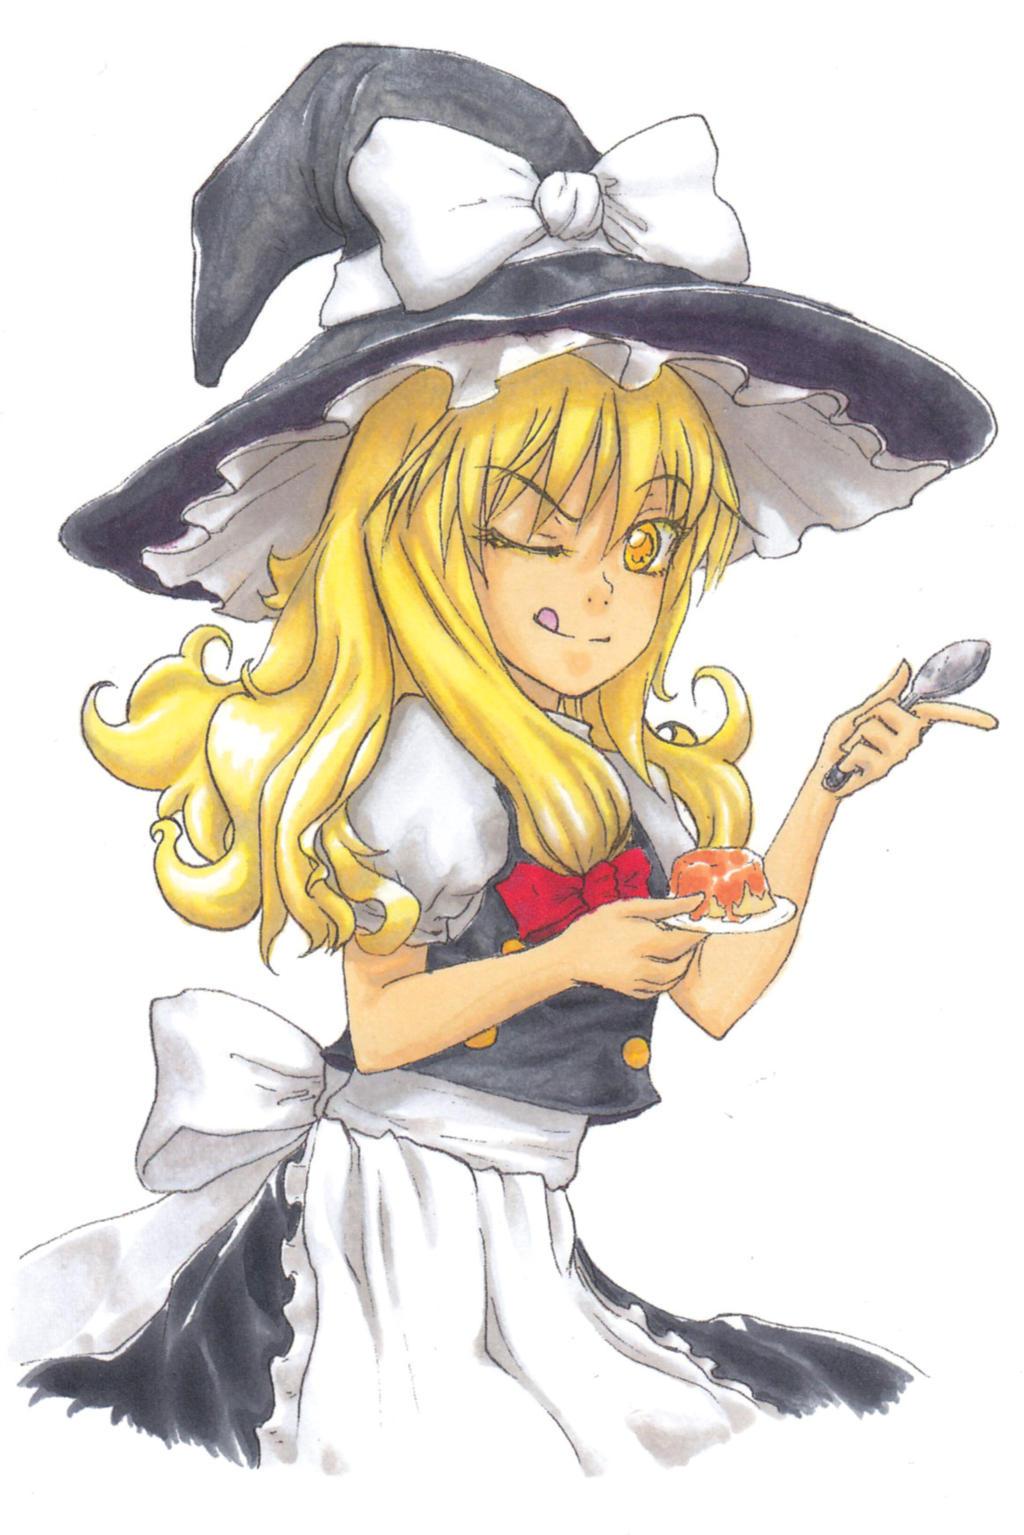 Marisa won't give it to you